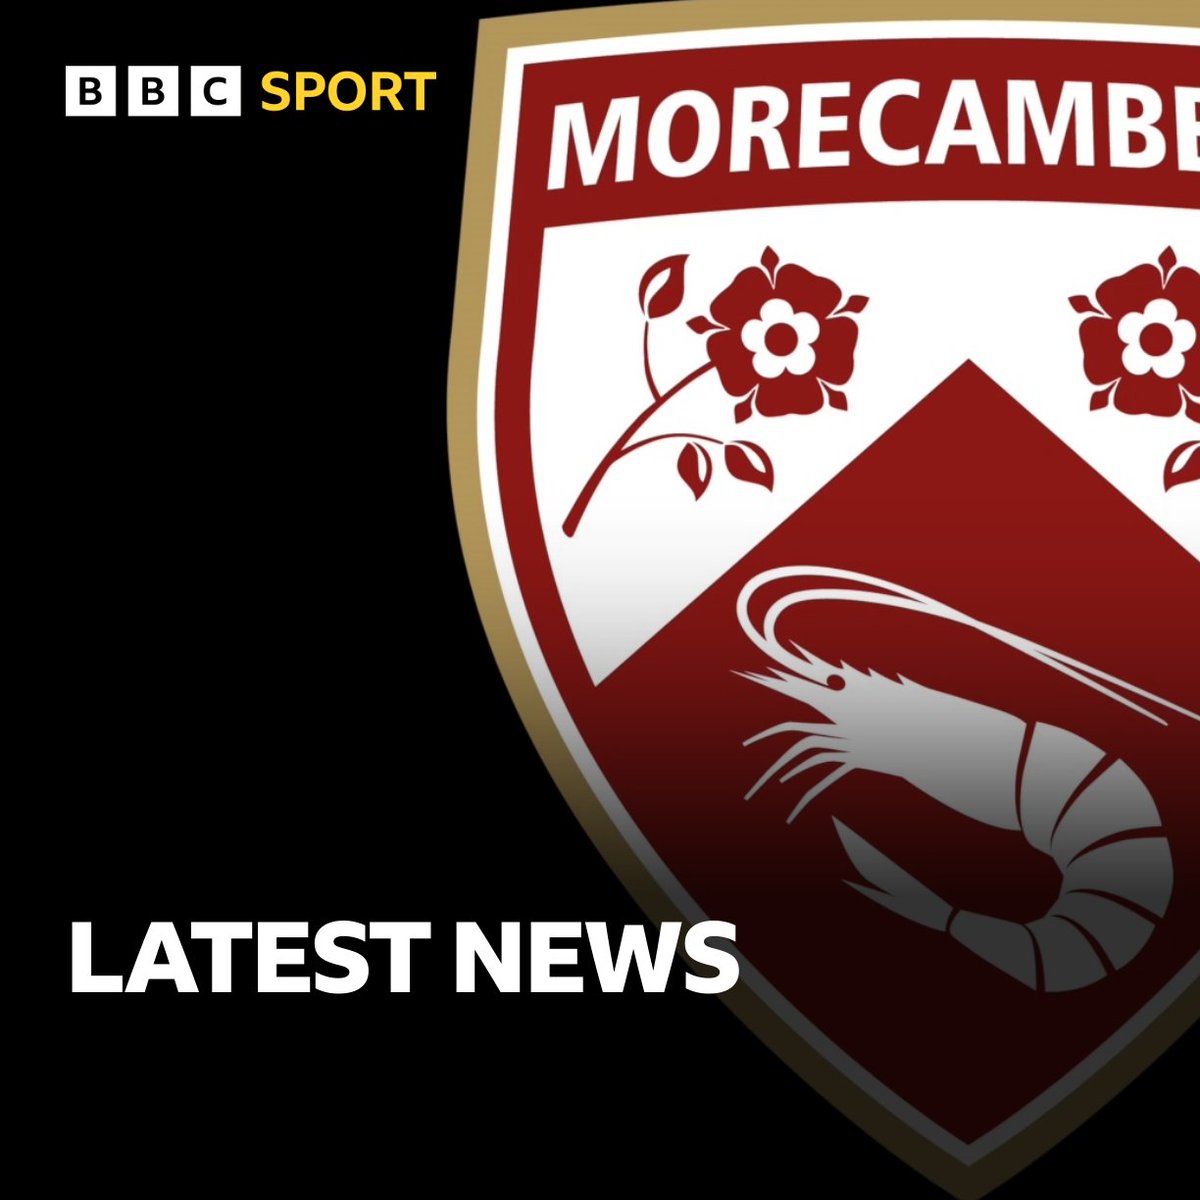 🔴 #Morecambe goalkeeper Stuart Moore has signed a contract extension with the Shrimps. The deal for the 24/25 season also has the option of a further year. Moore joins Gwion Edwards, who signed a two-year contract earlier #uts | #bbcefl | #bbcfootball